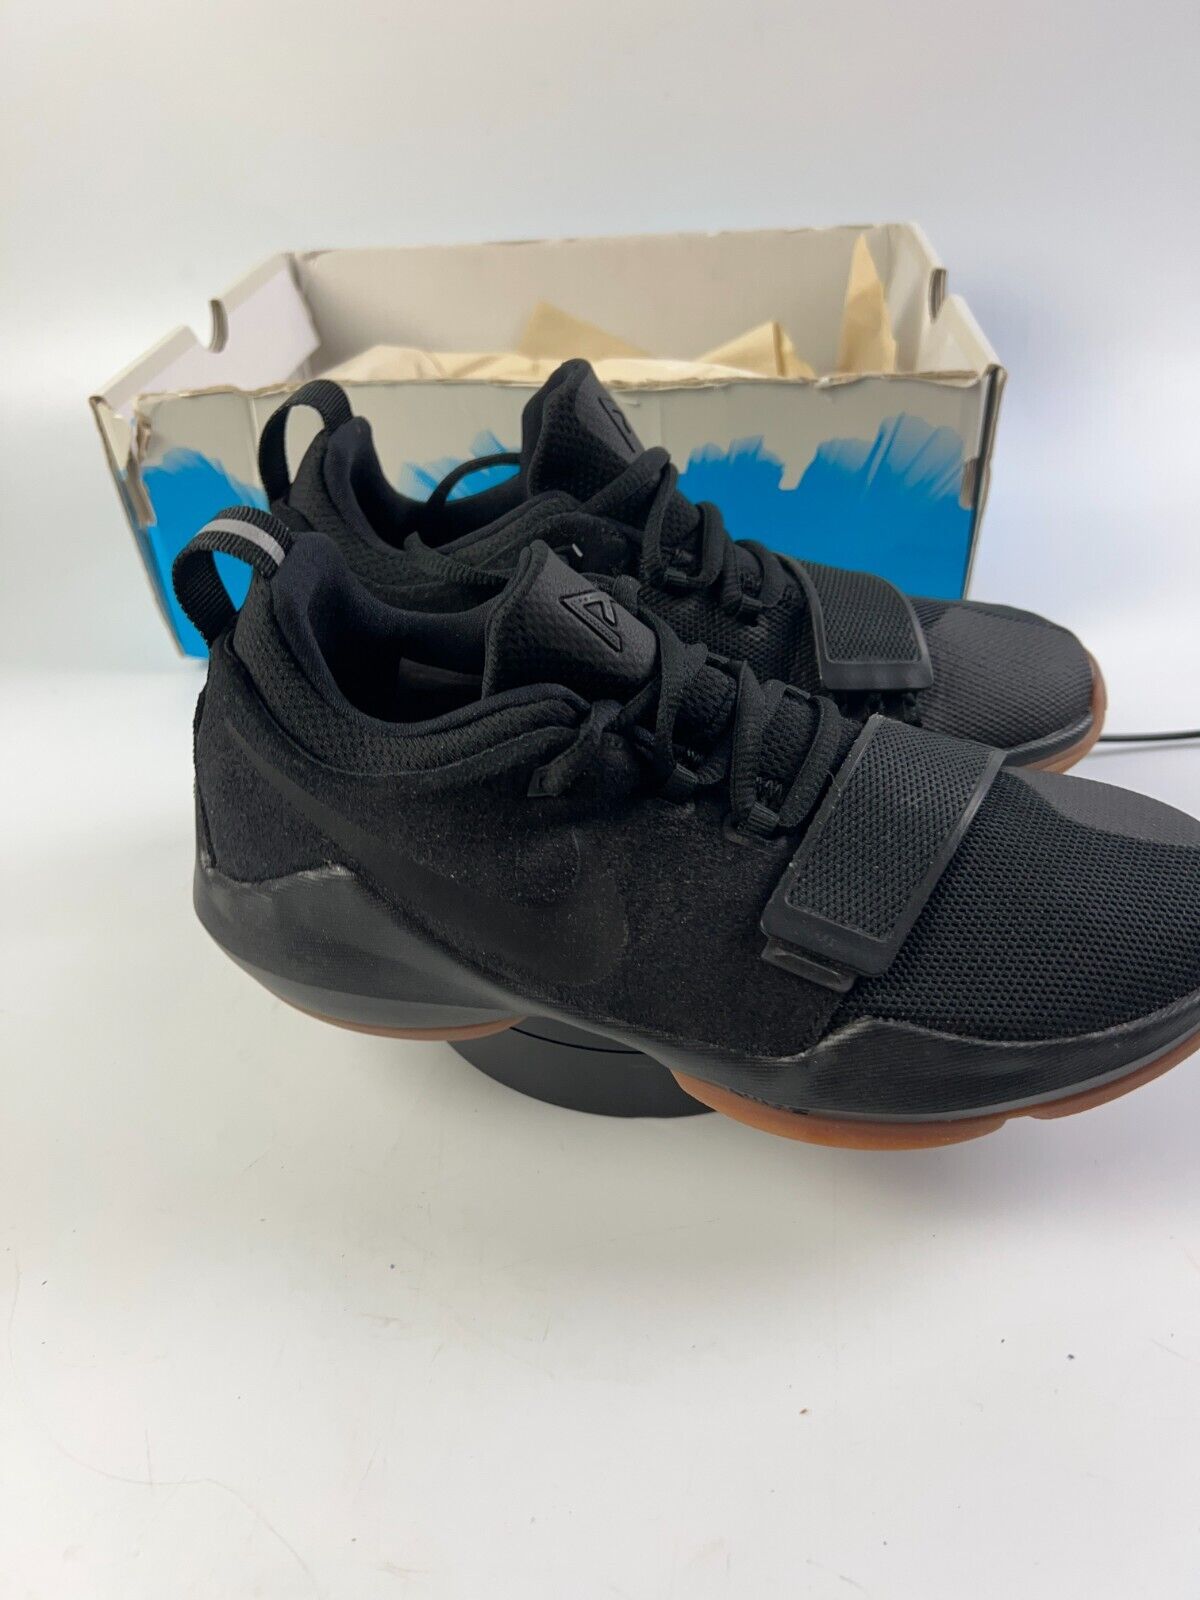 Nike PG 1 (GS) Basketball Shoes New Youth Size 5.5Y Black 880304 004